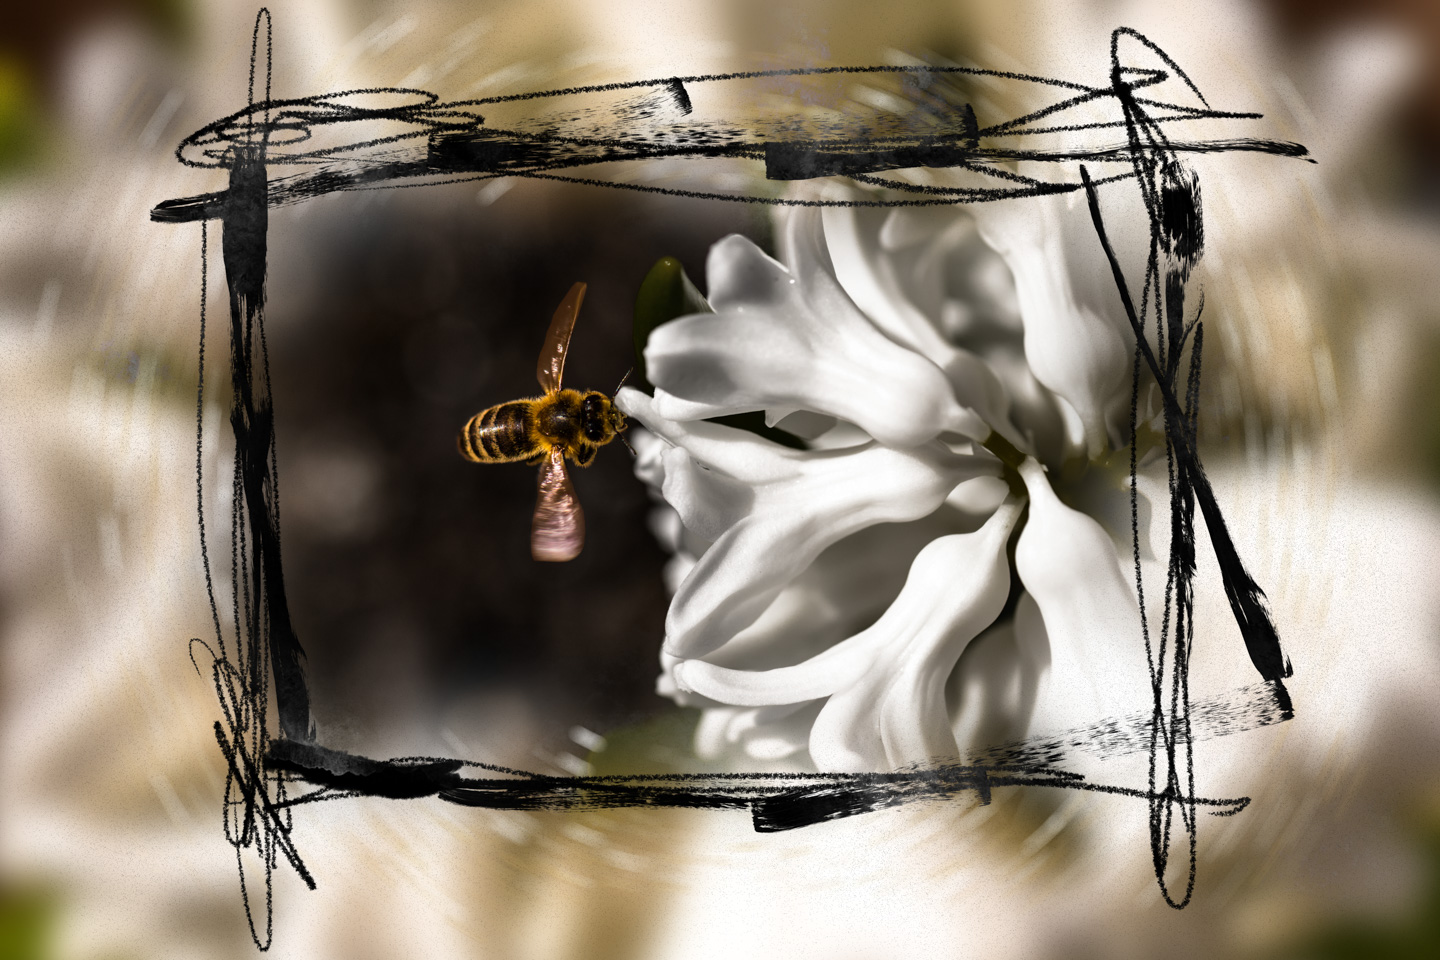 Bee and flower